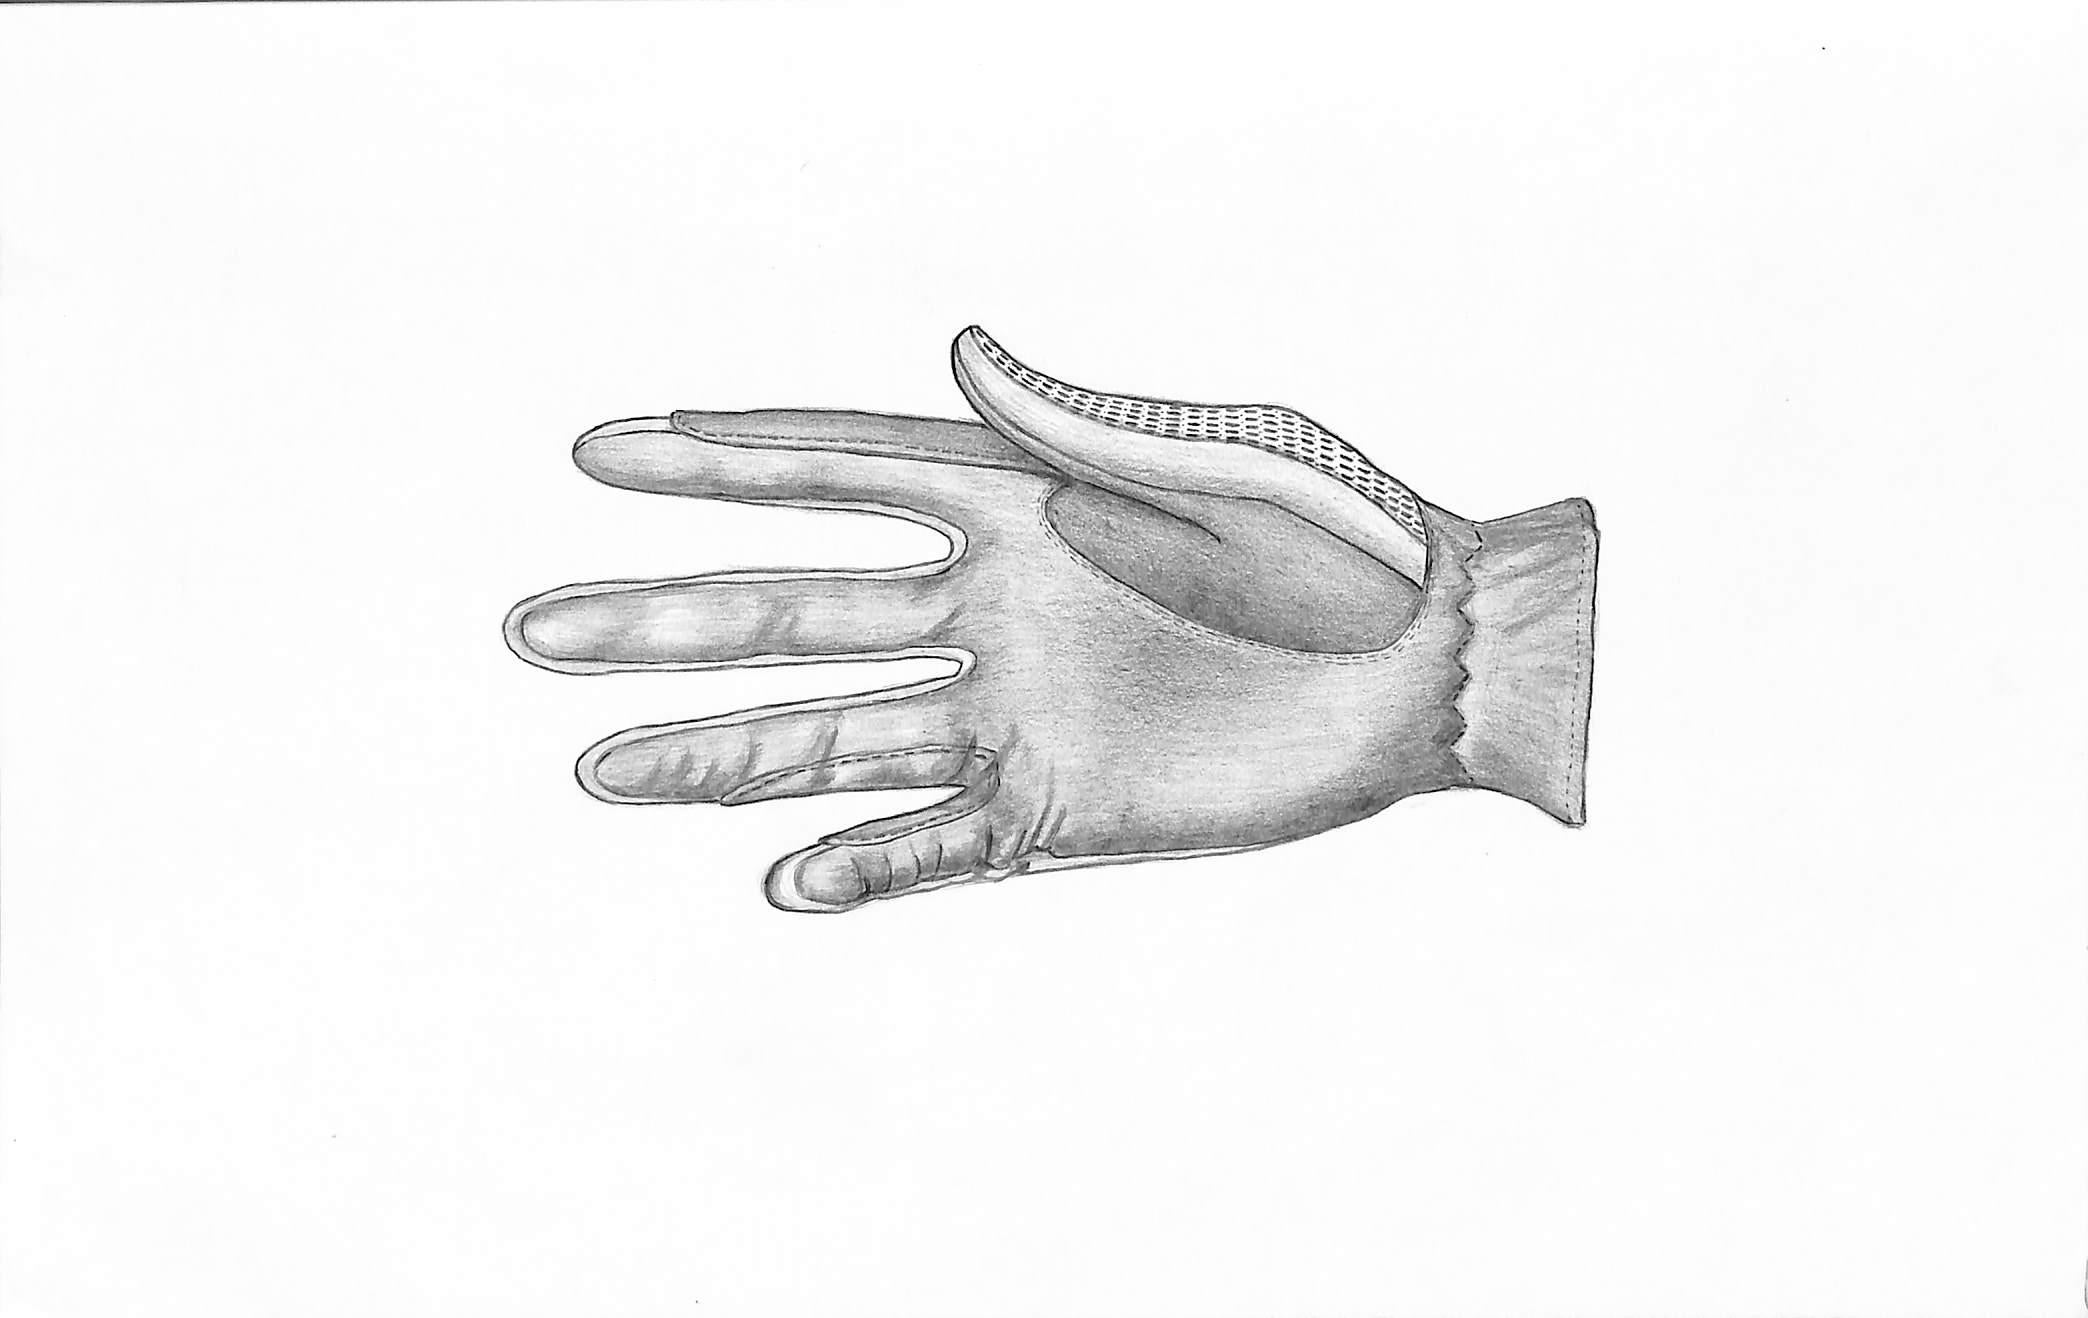 Crochet Back Glove Graphite Drawing - Art by Unknown